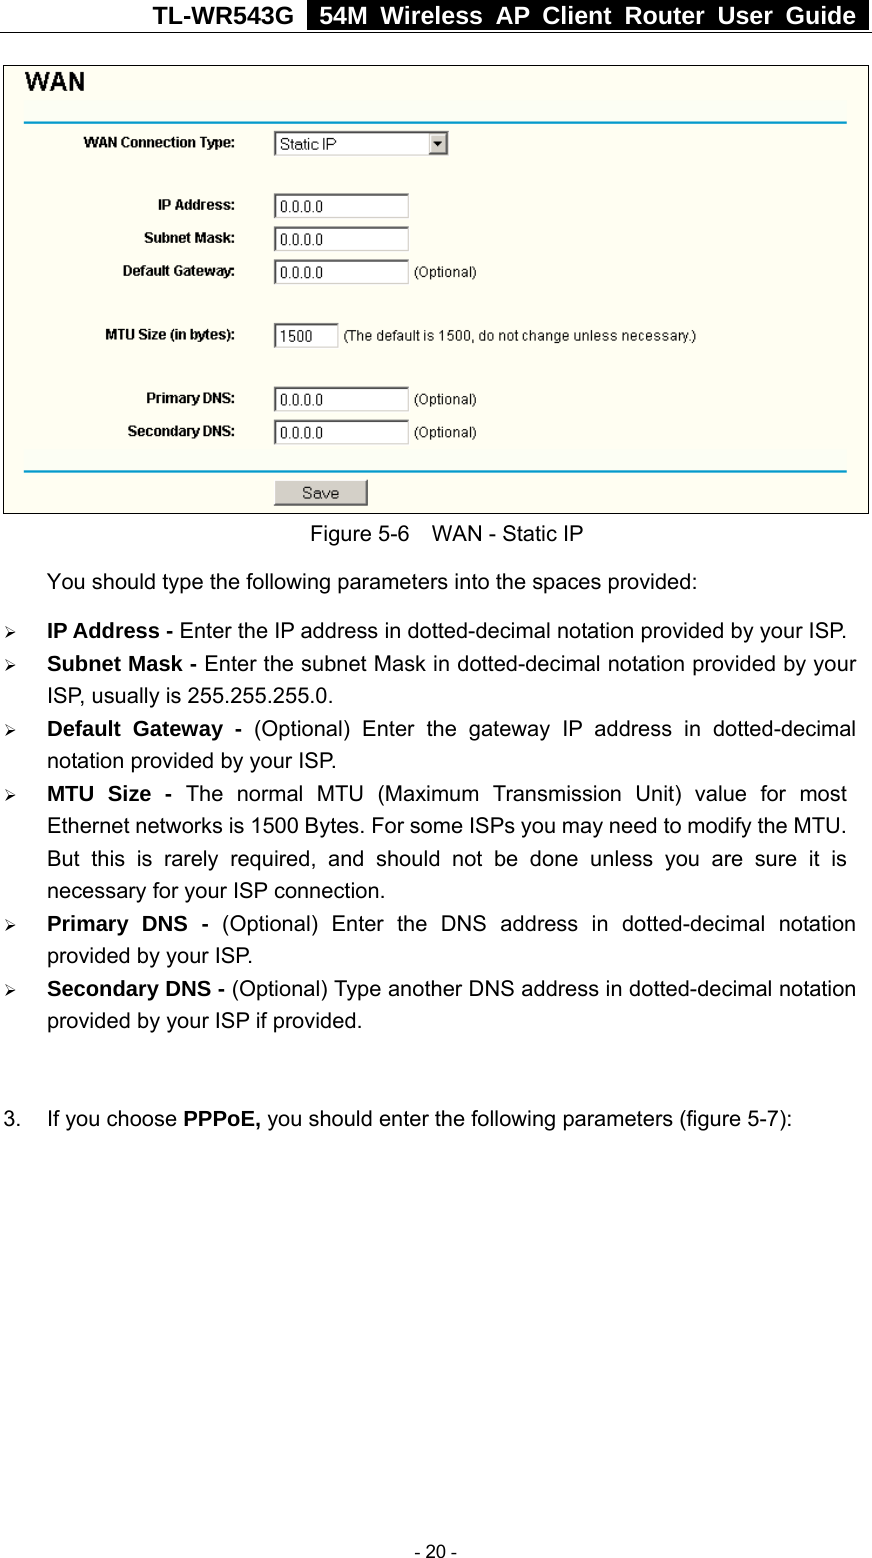 TL-WR543G   54M Wireless AP Client Router User Guide   Figure 5-6    WAN - Static IP You should type the following parameters into the spaces provided: ¾ IP Address - Enter the IP address in dotted-decimal notation provided by your ISP. ¾ Subnet Mask - Enter the subnet Mask in dotted-decimal notation provided by your ISP, usually is 255.255.255.0. ¾ Default Gateway - (Optional) Enter the gateway IP address in dotted-decimal notation provided by your ISP. ¾ MTU Size - The normal MTU (Maximum Transmission Unit) value for most Ethernet networks is 1500 Bytes. For some ISPs you may need to modify the MTU. But this is rarely required, and should not be done unless you are sure it is necessary for your ISP connection. ¾ Primary DNS - (Optional) Enter the DNS address in dotted-decimal notation provided by your ISP. ¾ Secondary DNS - (Optional) Type another DNS address in dotted-decimal notation provided by your ISP if provided.  3.  If you choose PPPoE, you should enter the following parameters (figure 5-7):    - 20 - 